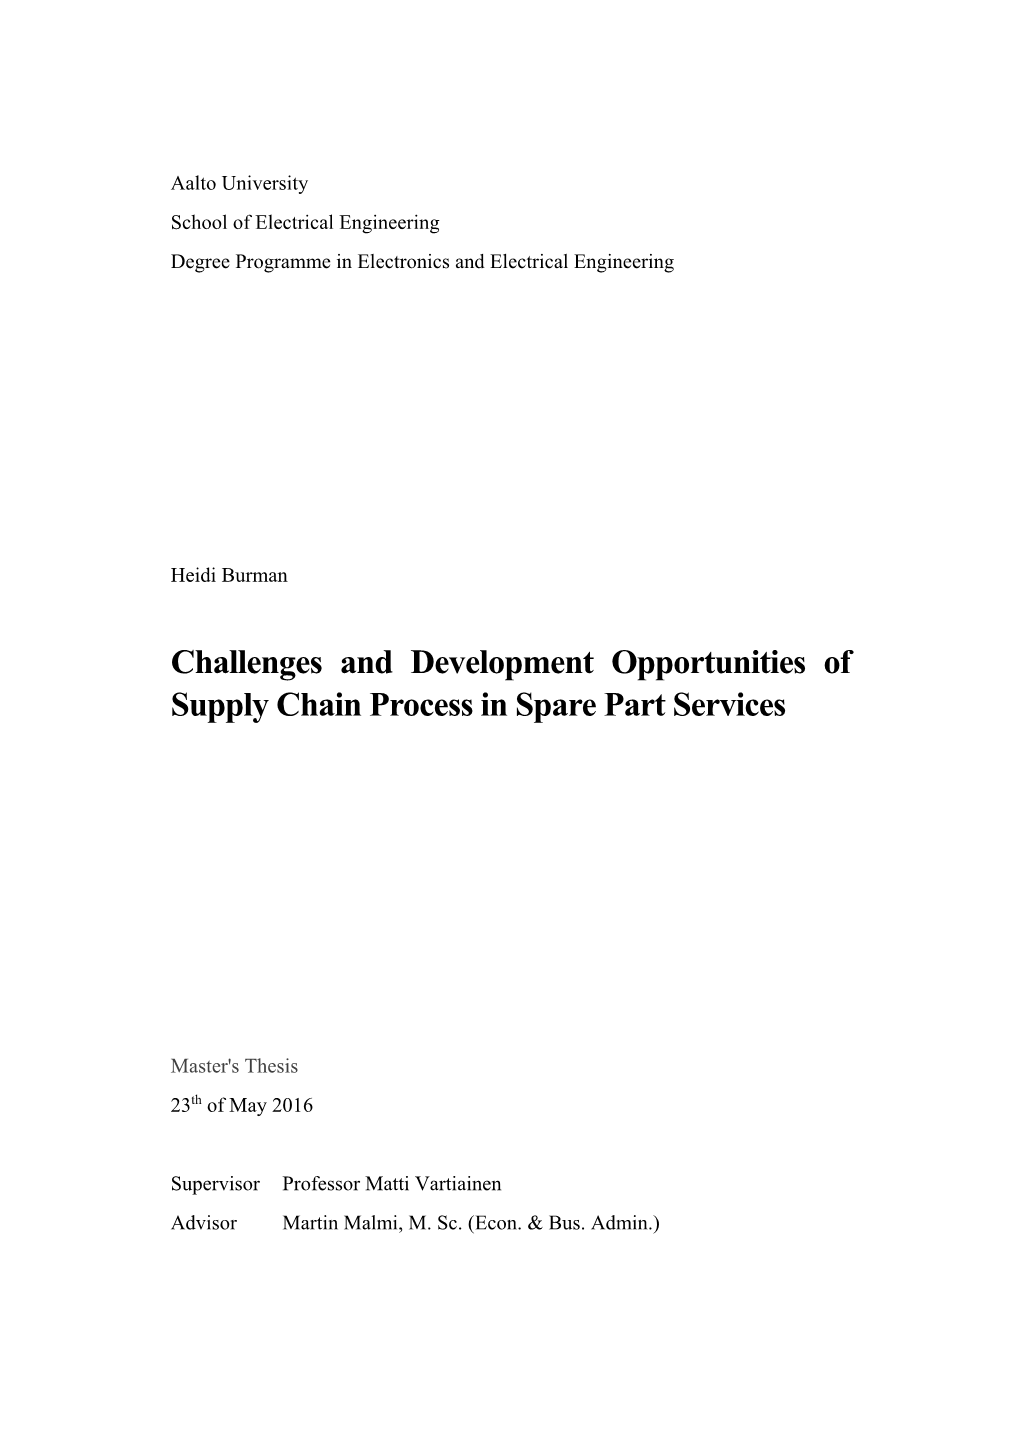 Challenges and Development Opportunities of Supply Chain Process in Spare Part Services